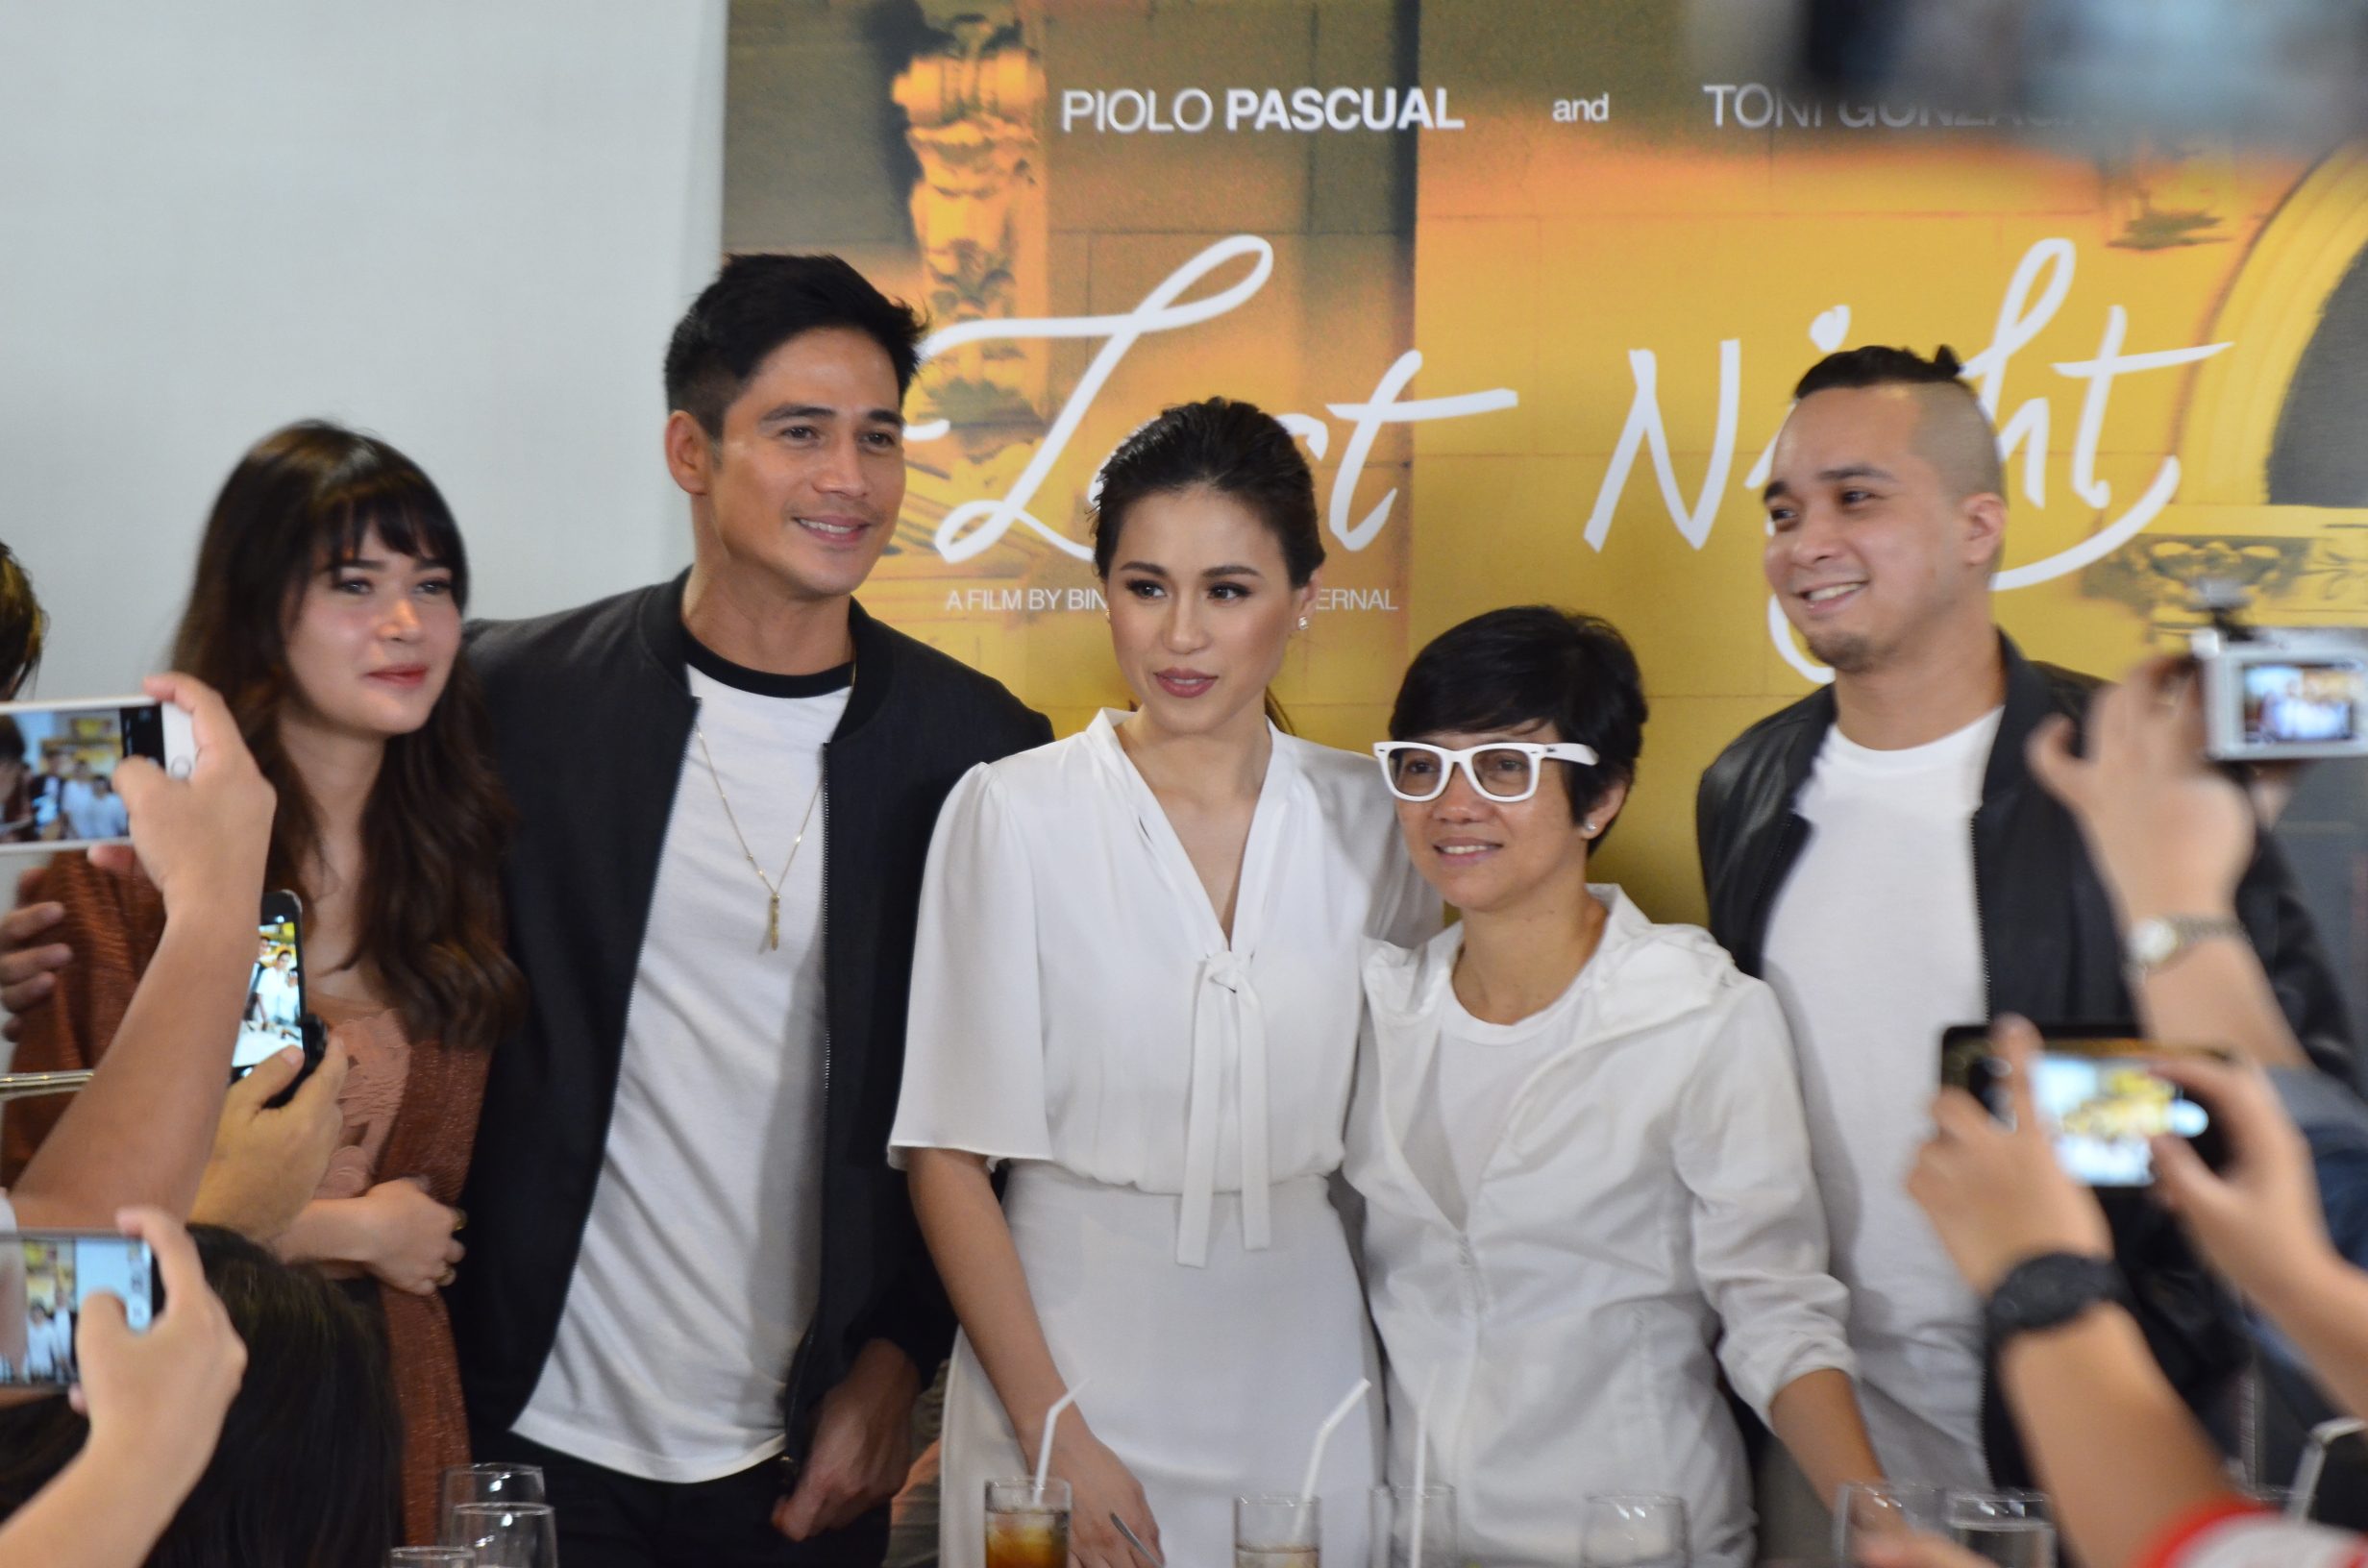 'LAST NIGHT'. Bela Padilla, Piolo Pascual, Toni Gonzaga, Joyce Bernal, and Neil Arce pose for photos during the bloggers' conference.  